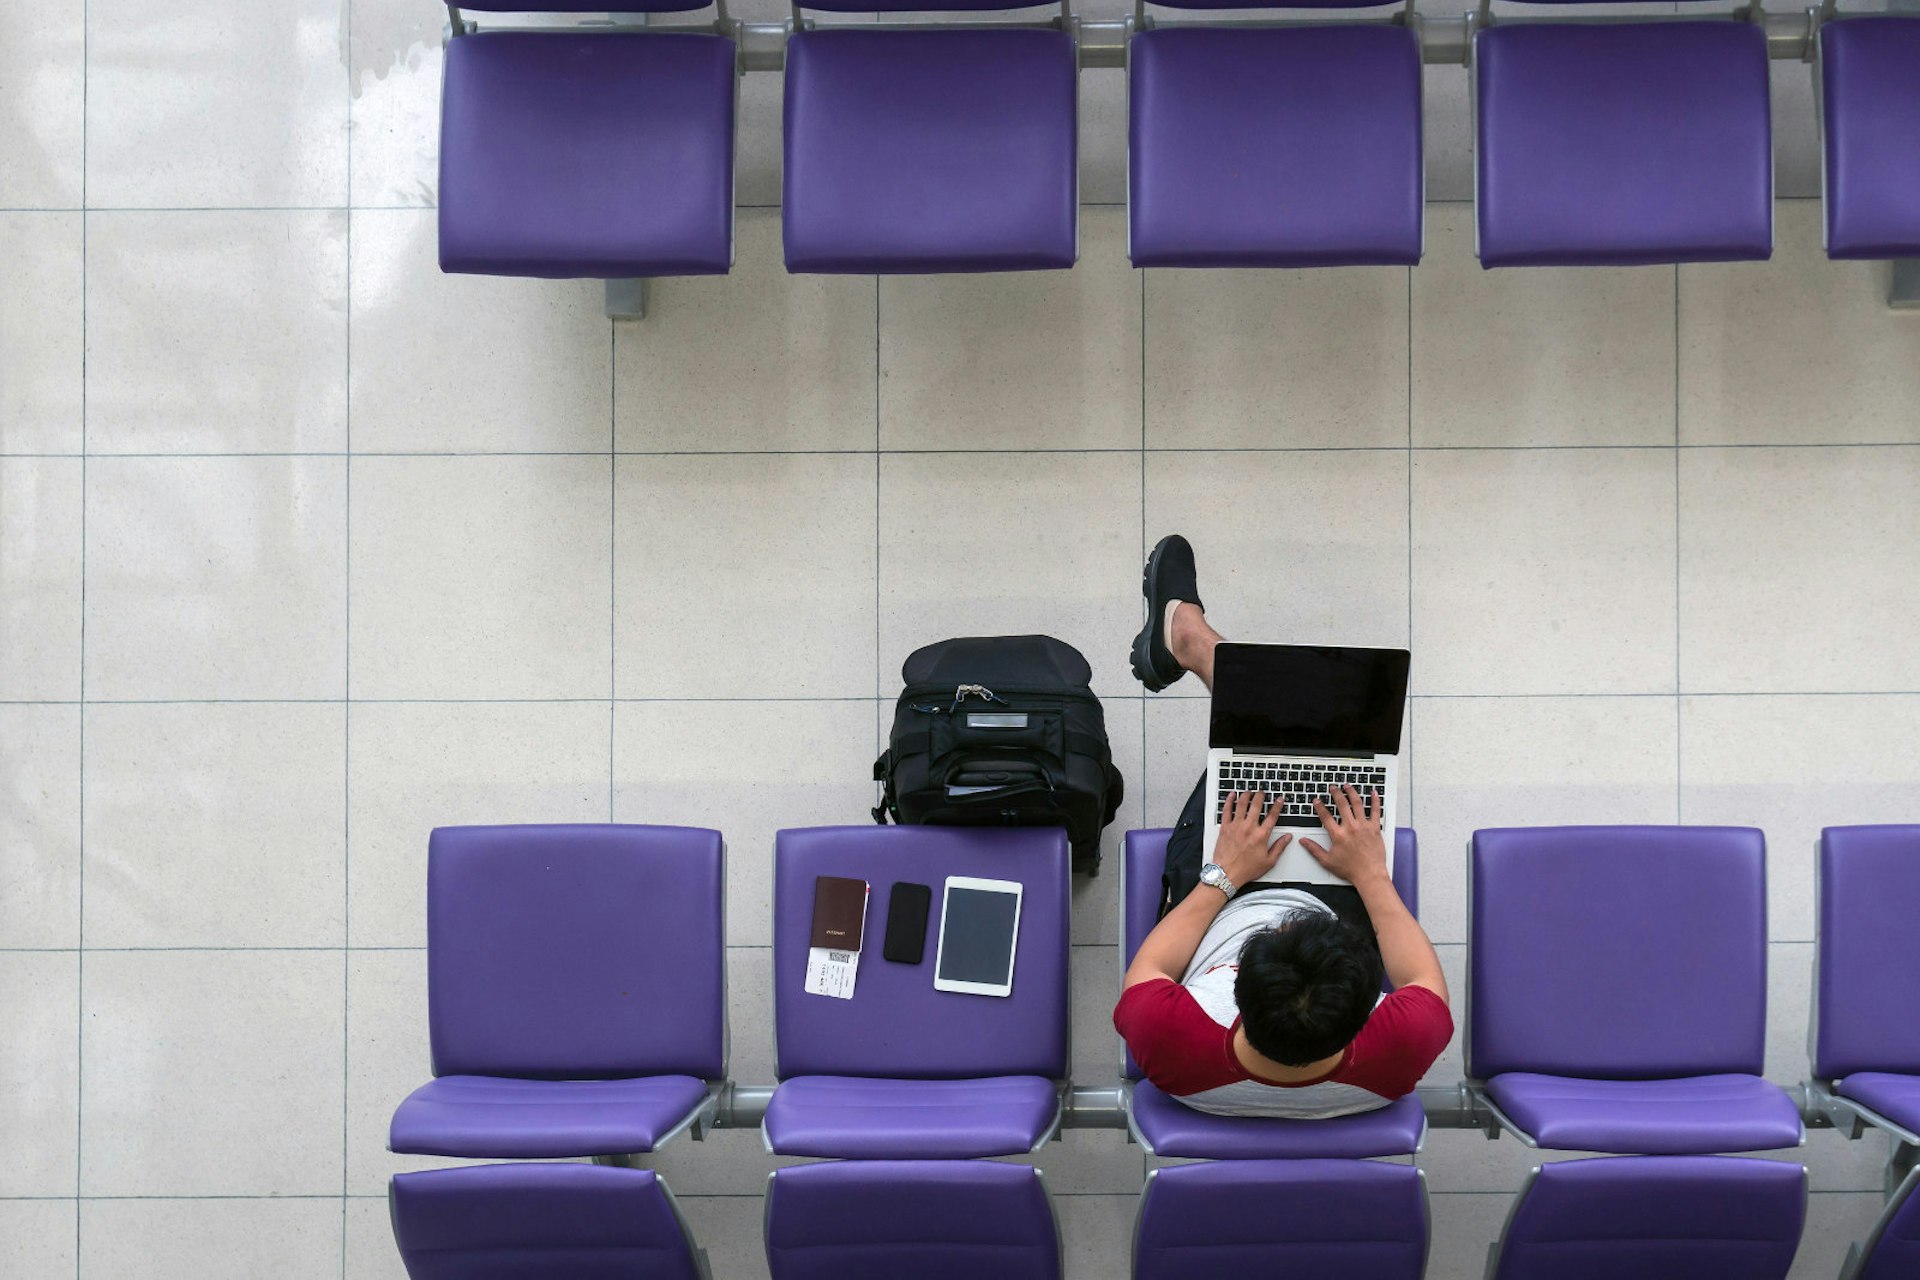 An aerial shot of a male traveller wearing shorts and tshirt working on his laptop in an airport departure lounge. His tablet, phone and passport are on a purple seat next to him and his bag is on the ground.